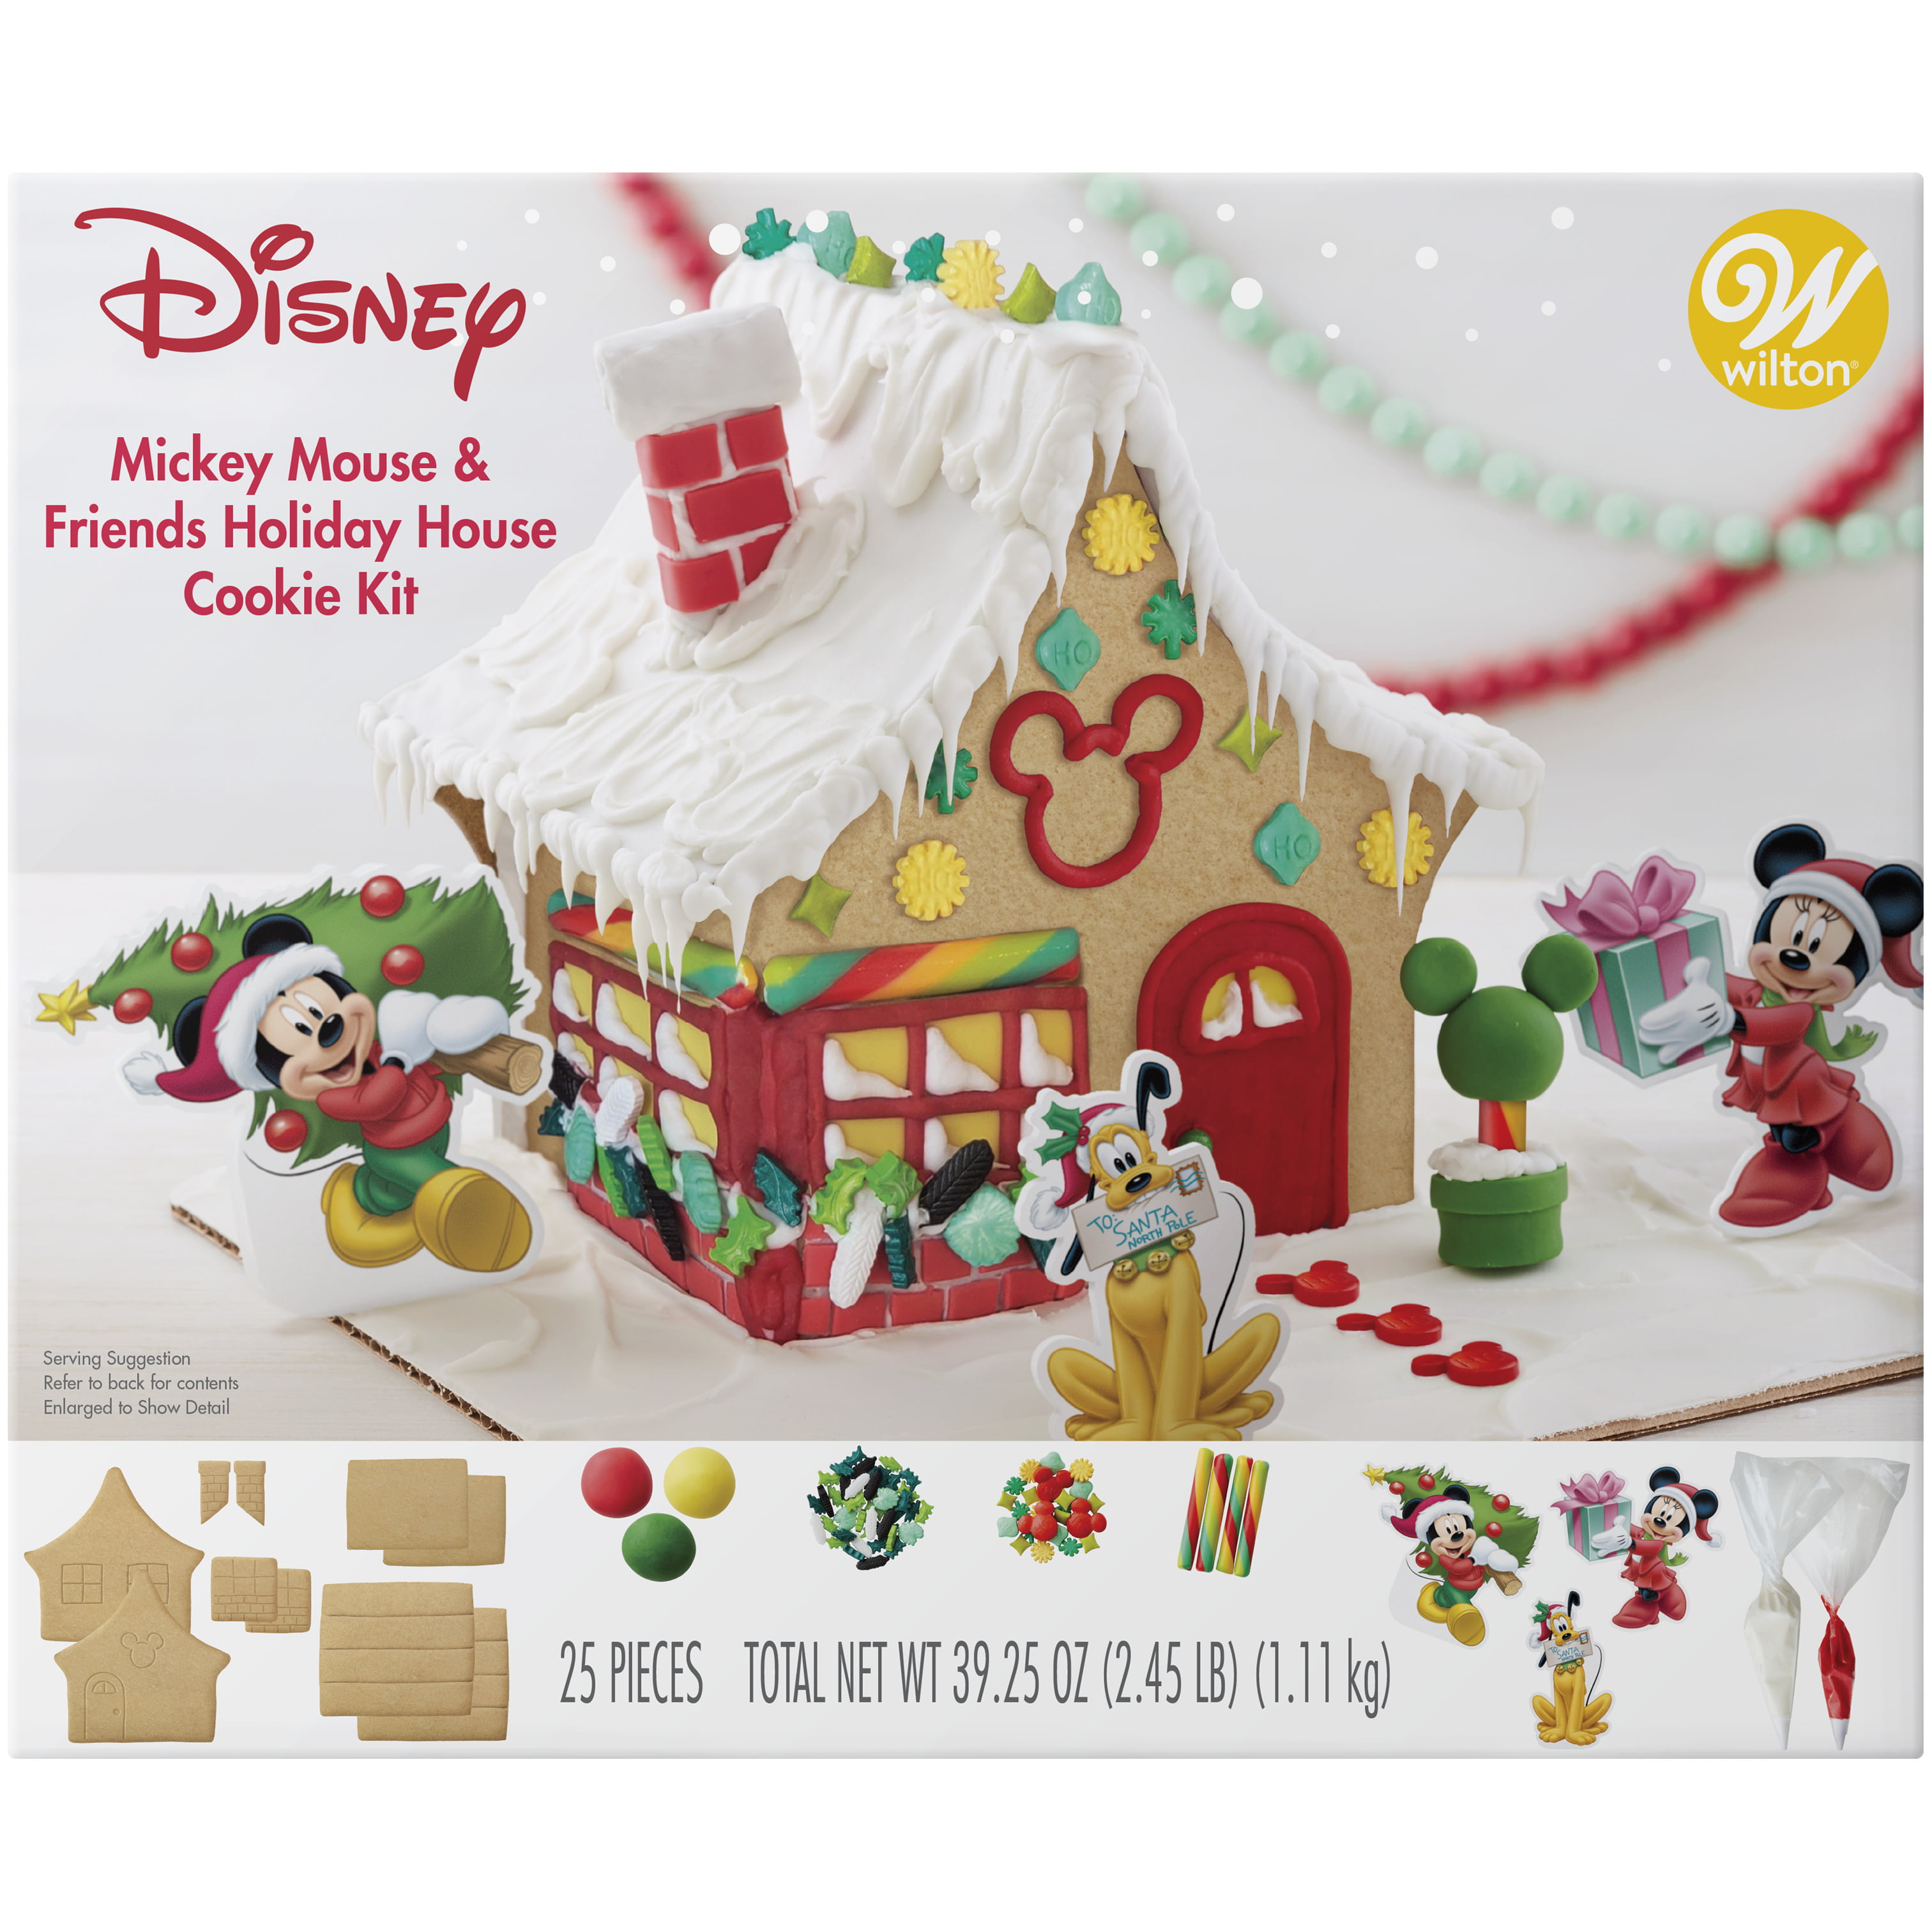 NWT Disney 2020 Christmas Pin Gingerbread Mickey Mouse Minnie Mouse